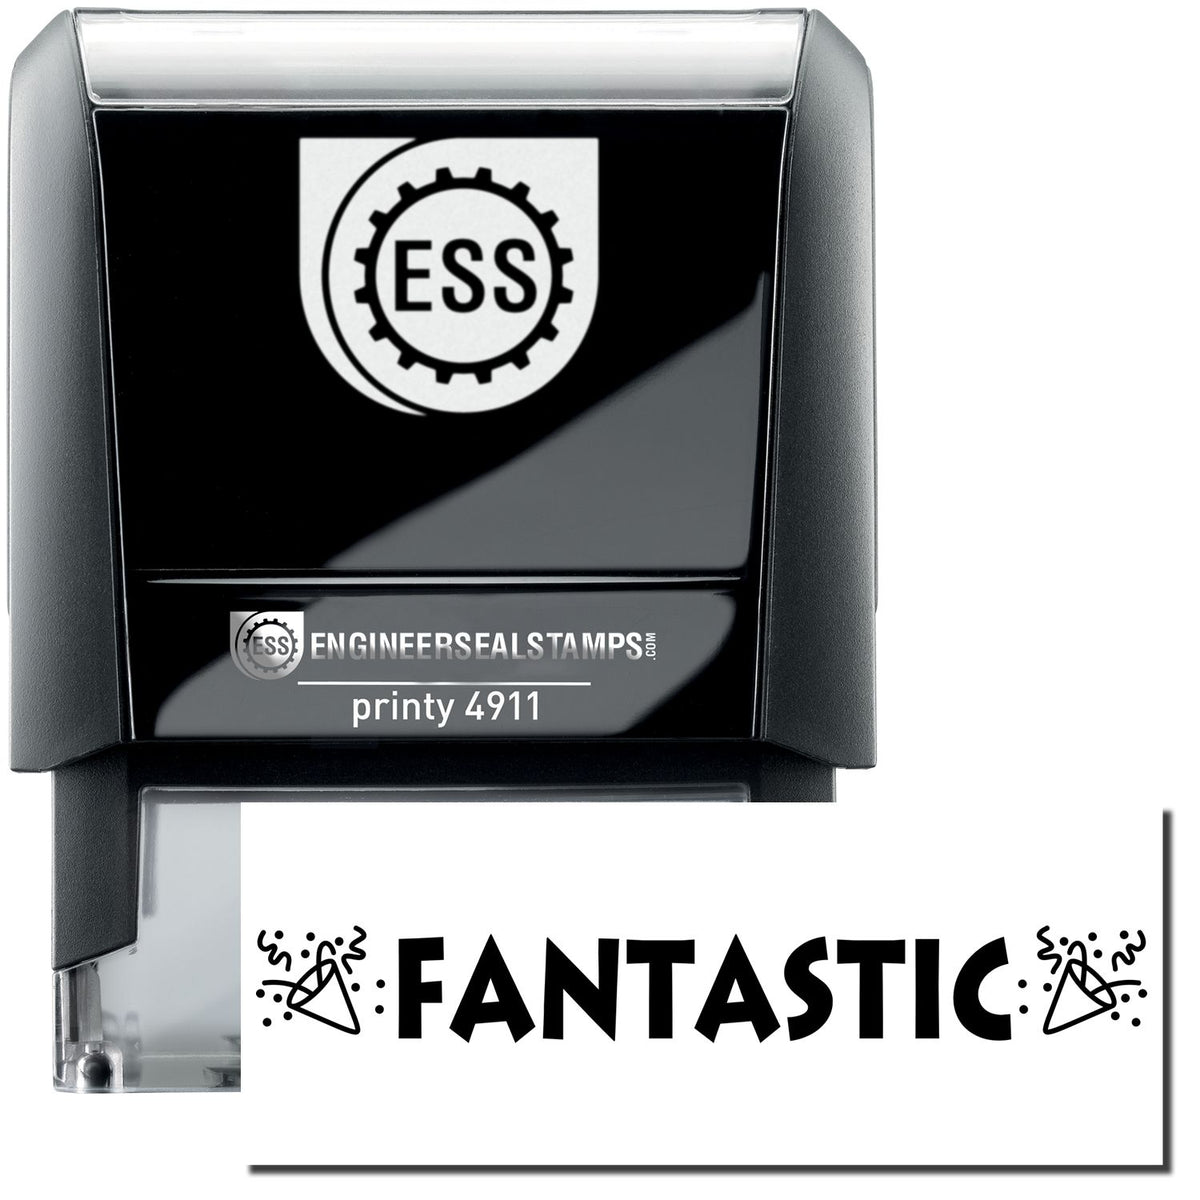 A self-inking stamp with a stamped image showing how the text &quot;FANTASTIC&quot; (in jagged letters and bold font with images of noise blowers on each side) is displayed after stamping.